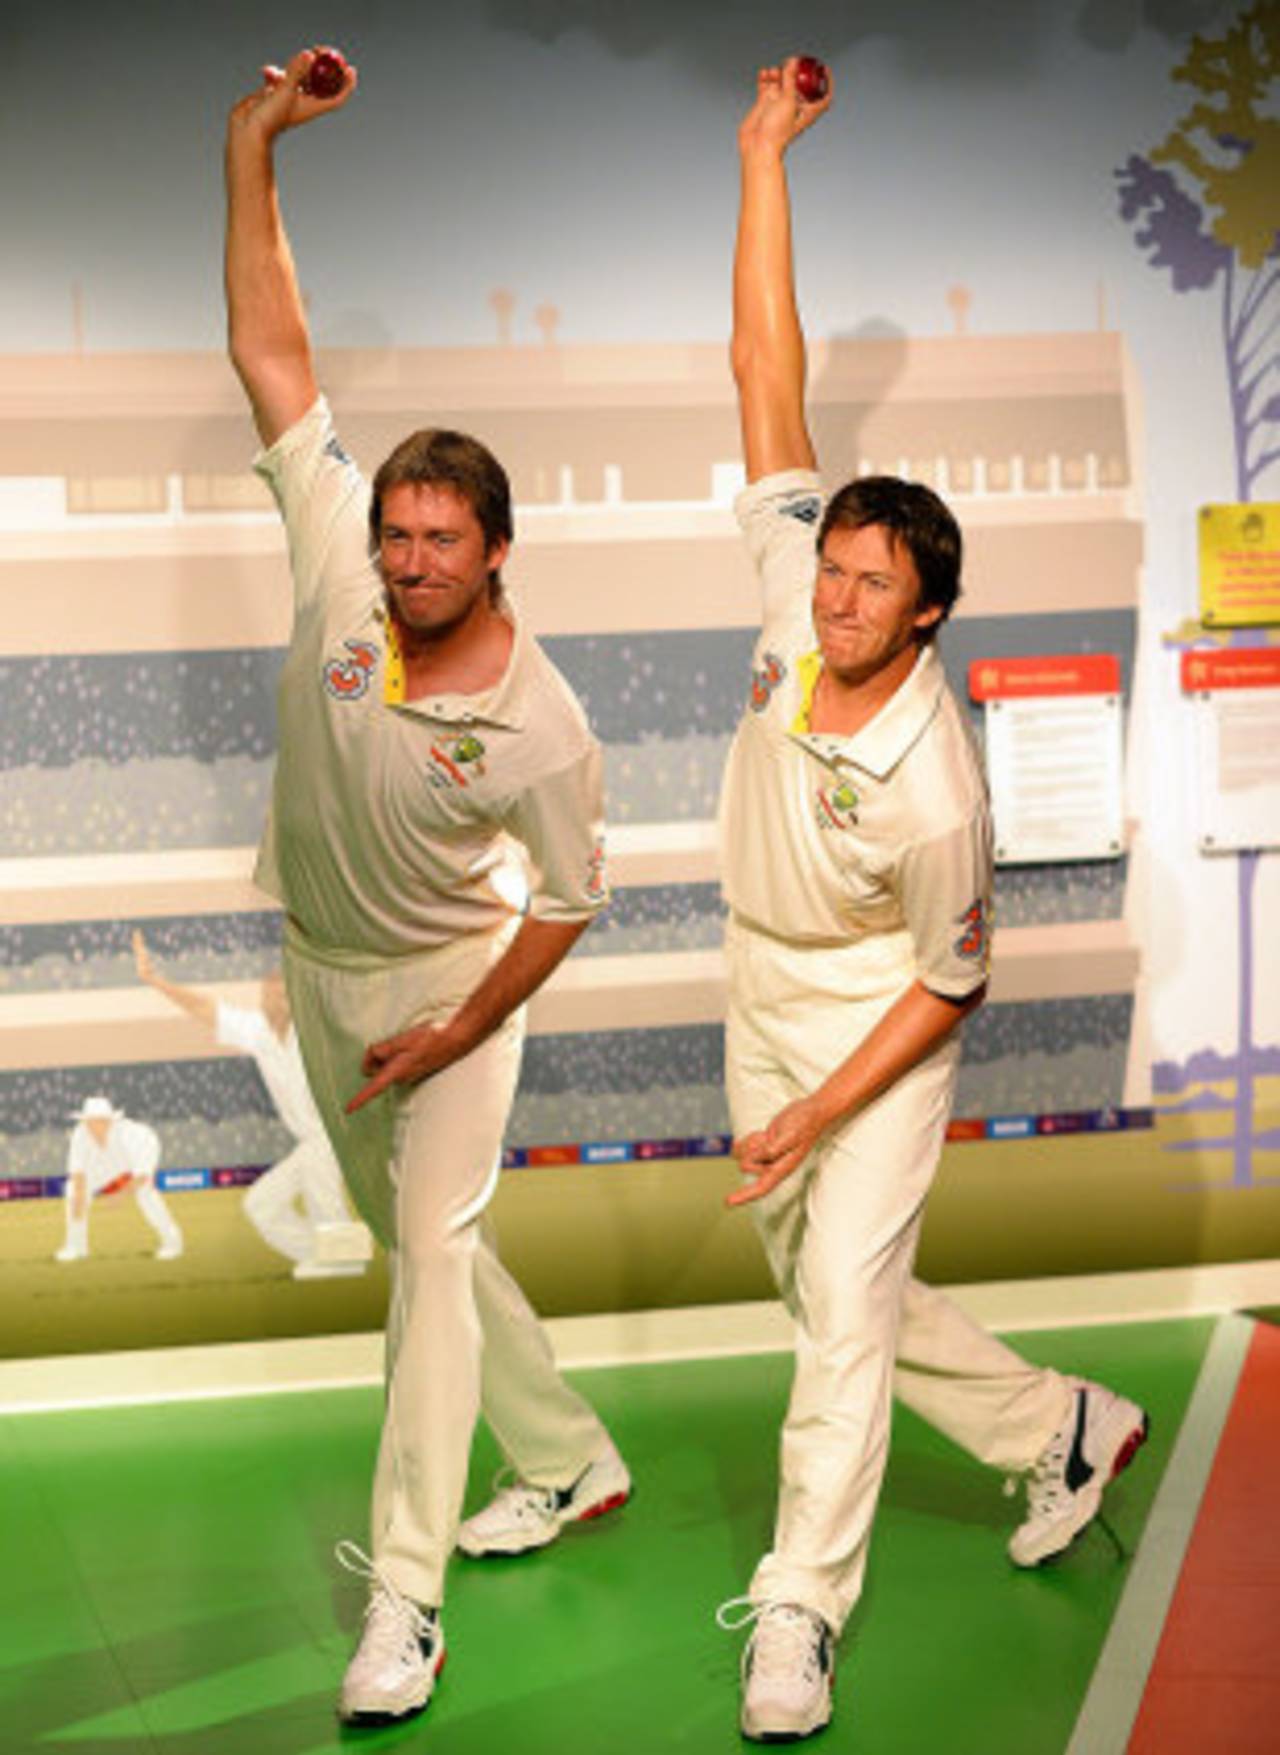 Glenn McGrath imitates the pose of a wax statue of himself at Madame Tussauds, Sydney, July 31, 2013 